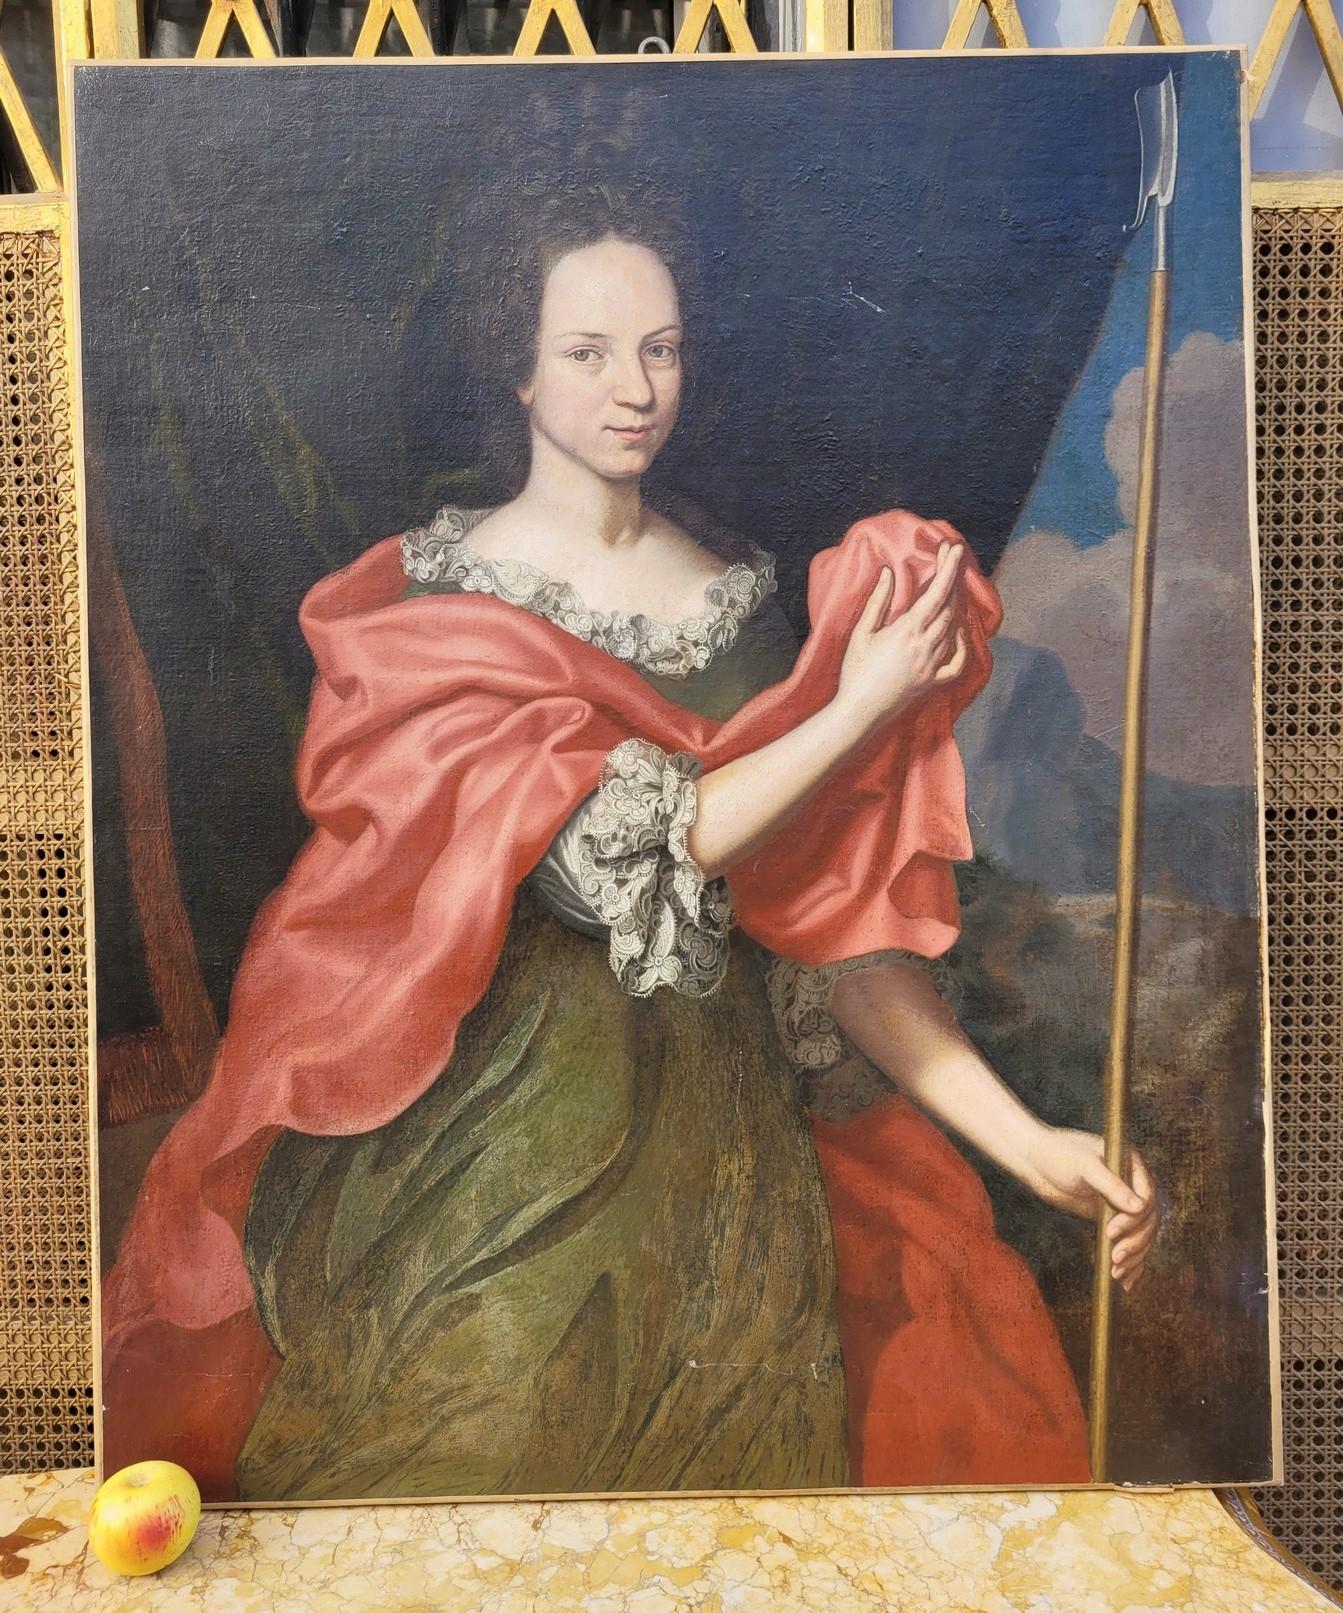 Large portrait of a standing lady of quality, richly dressed in a dress with lace

Oil on canvas from the 18th century, on a modern stretcher, old restorations, re-canvased (formerly): good condition, note small scratches

Dimensions: H112.5 x 92cm

